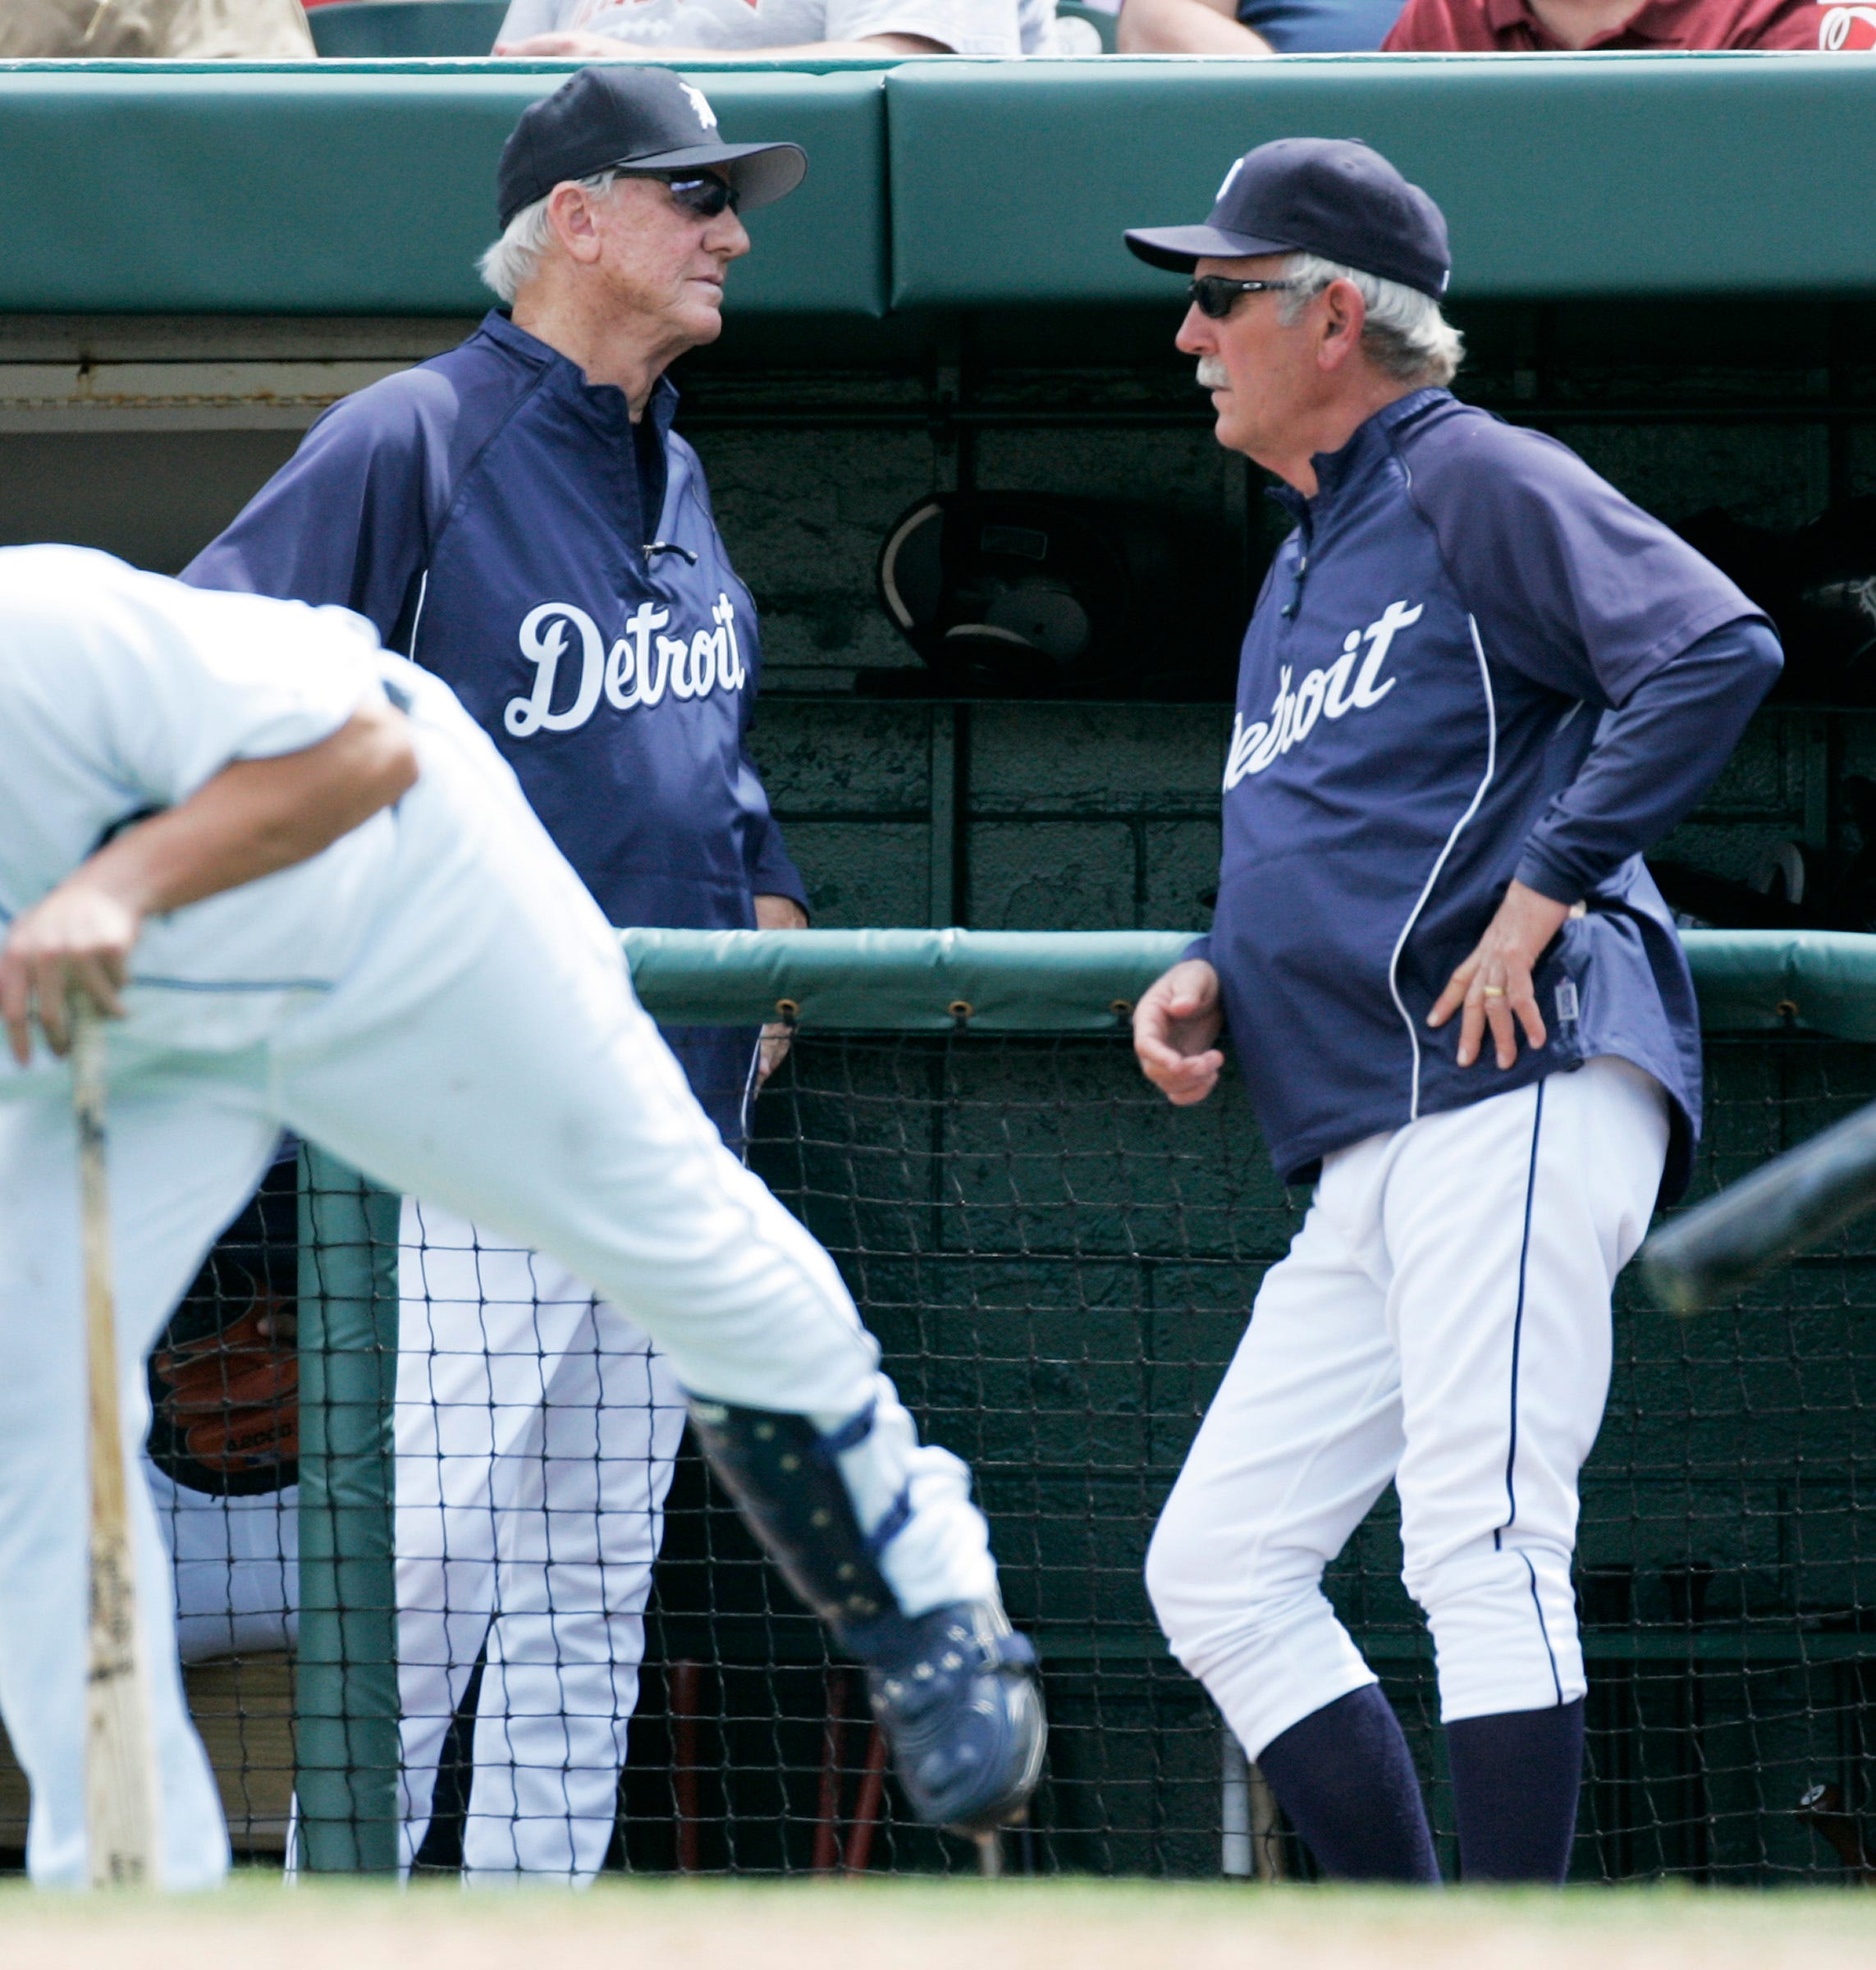 Tigers manager Jim Leyland, right, talks with Al Kaline near the dugout as the Detroit Tigers take on the Houston Astros in spring training action at Joker Marchant Stadium in Lakeland, Fla. on March 12, 2008.